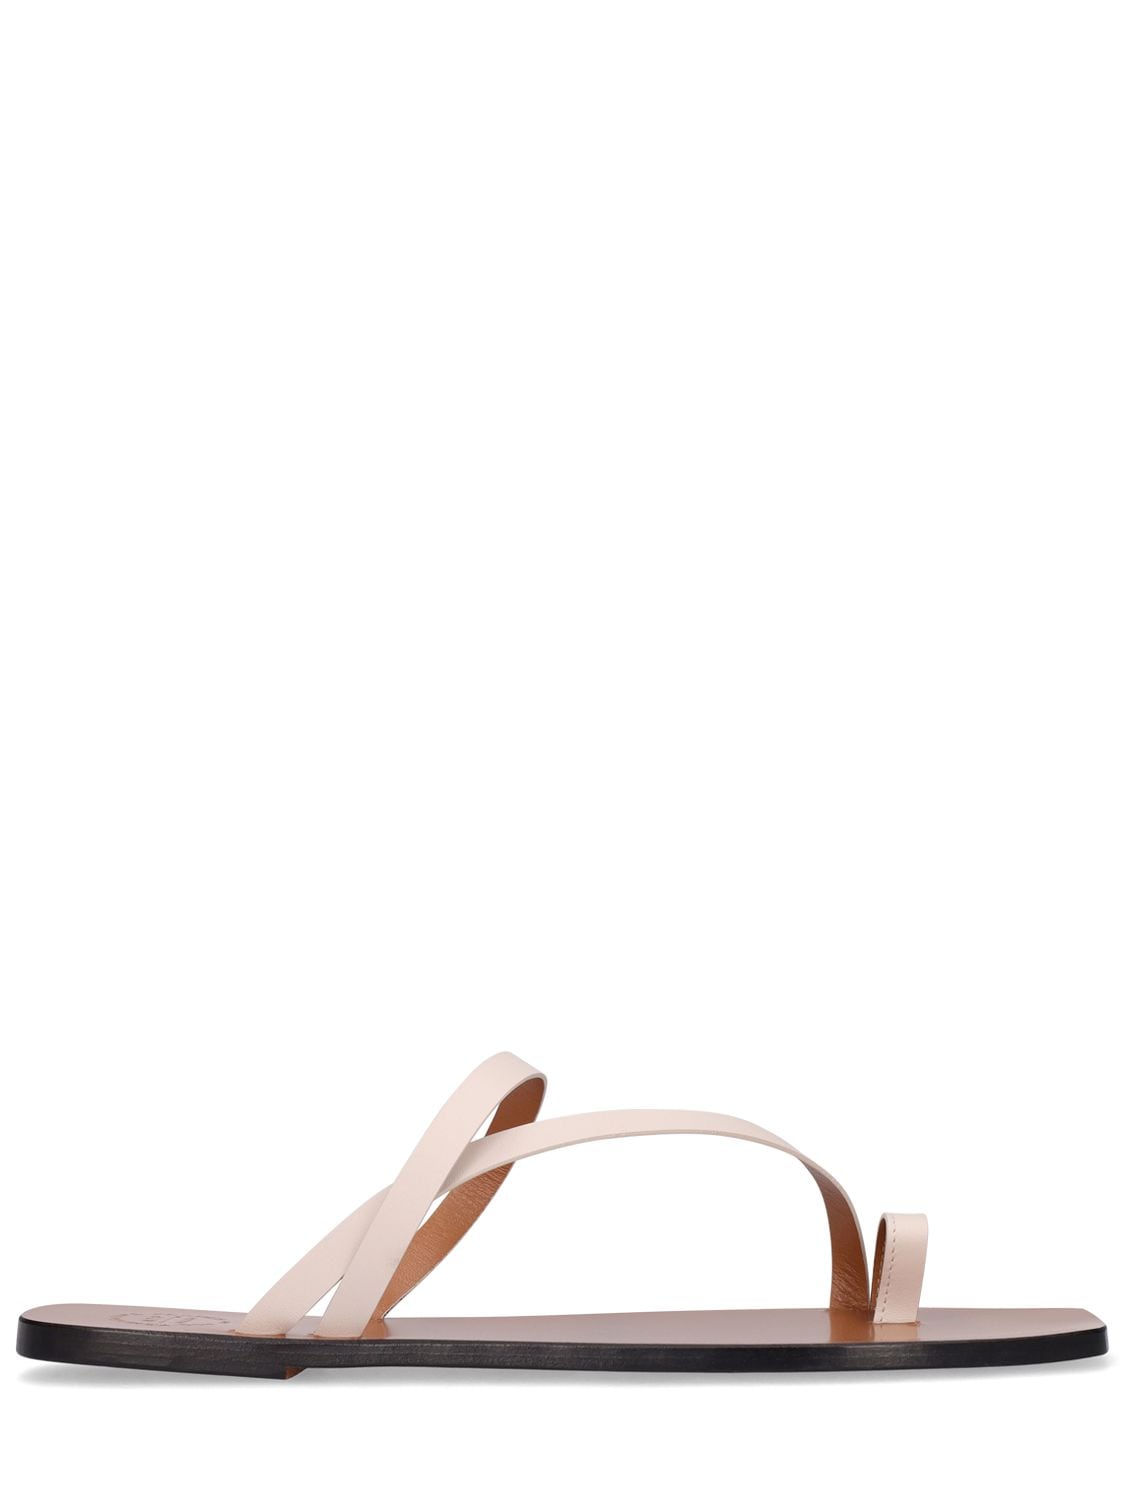 10mm Desio Leather Thong Sandals